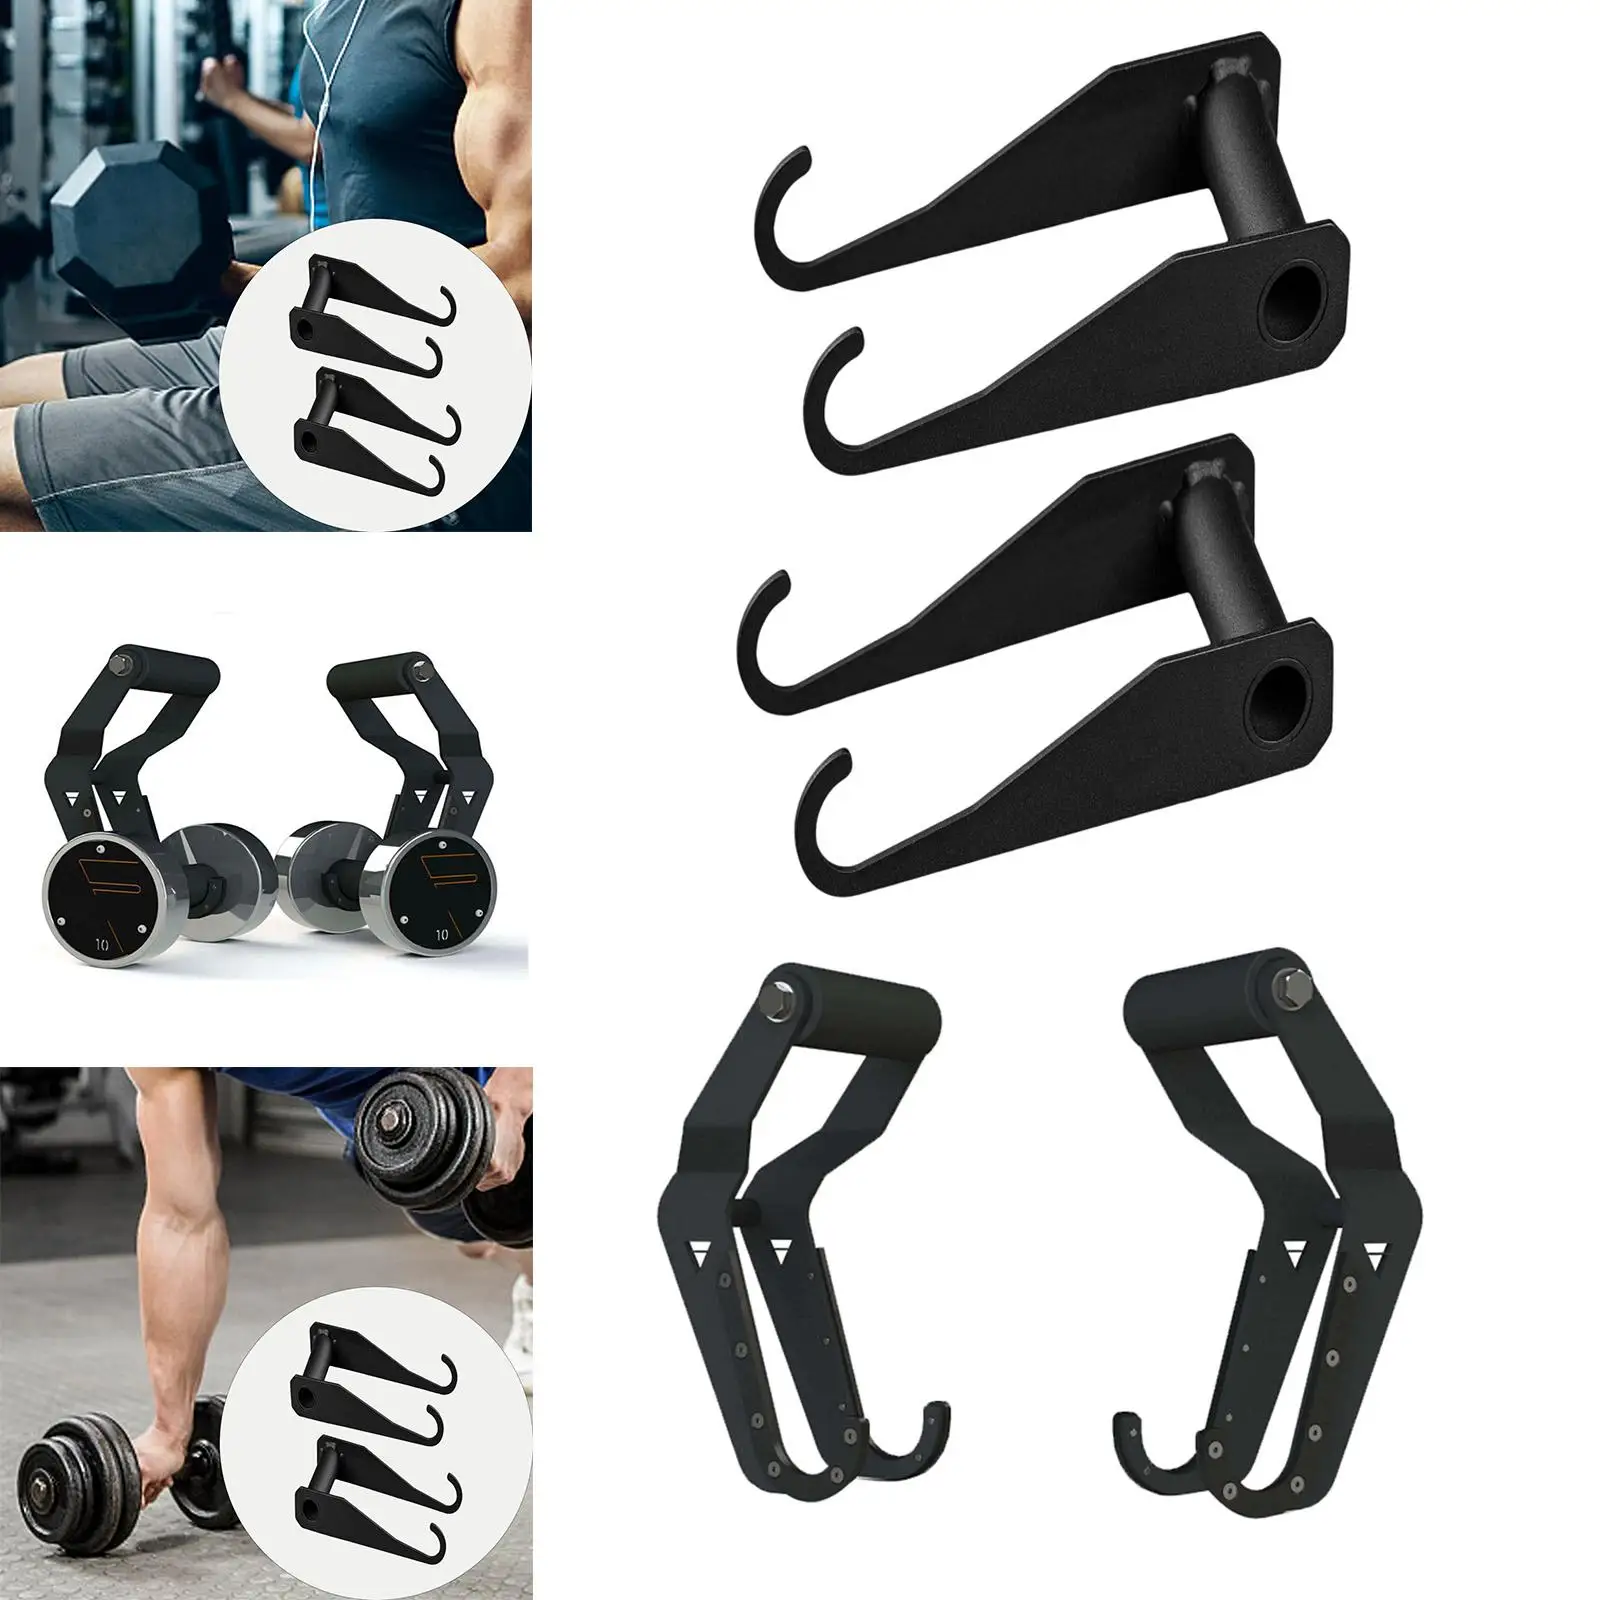 Dumbbell Hooks Handles Exercise Machine Attachments Parts Kettlebell Grip for Fitness Home Gym Bodybuilding Weight Lifting